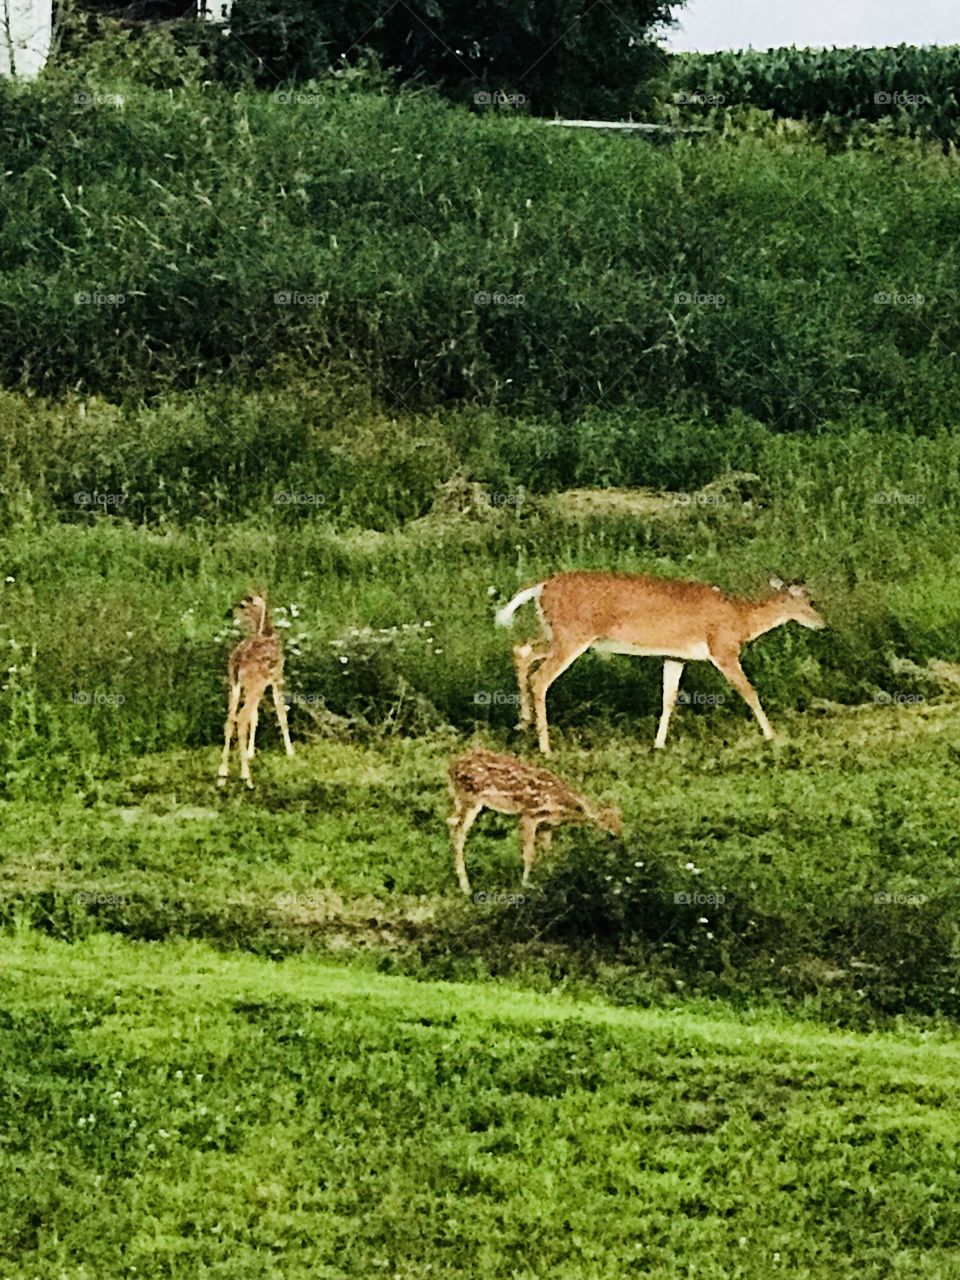 Momma and her fawns, a beautiful family of three